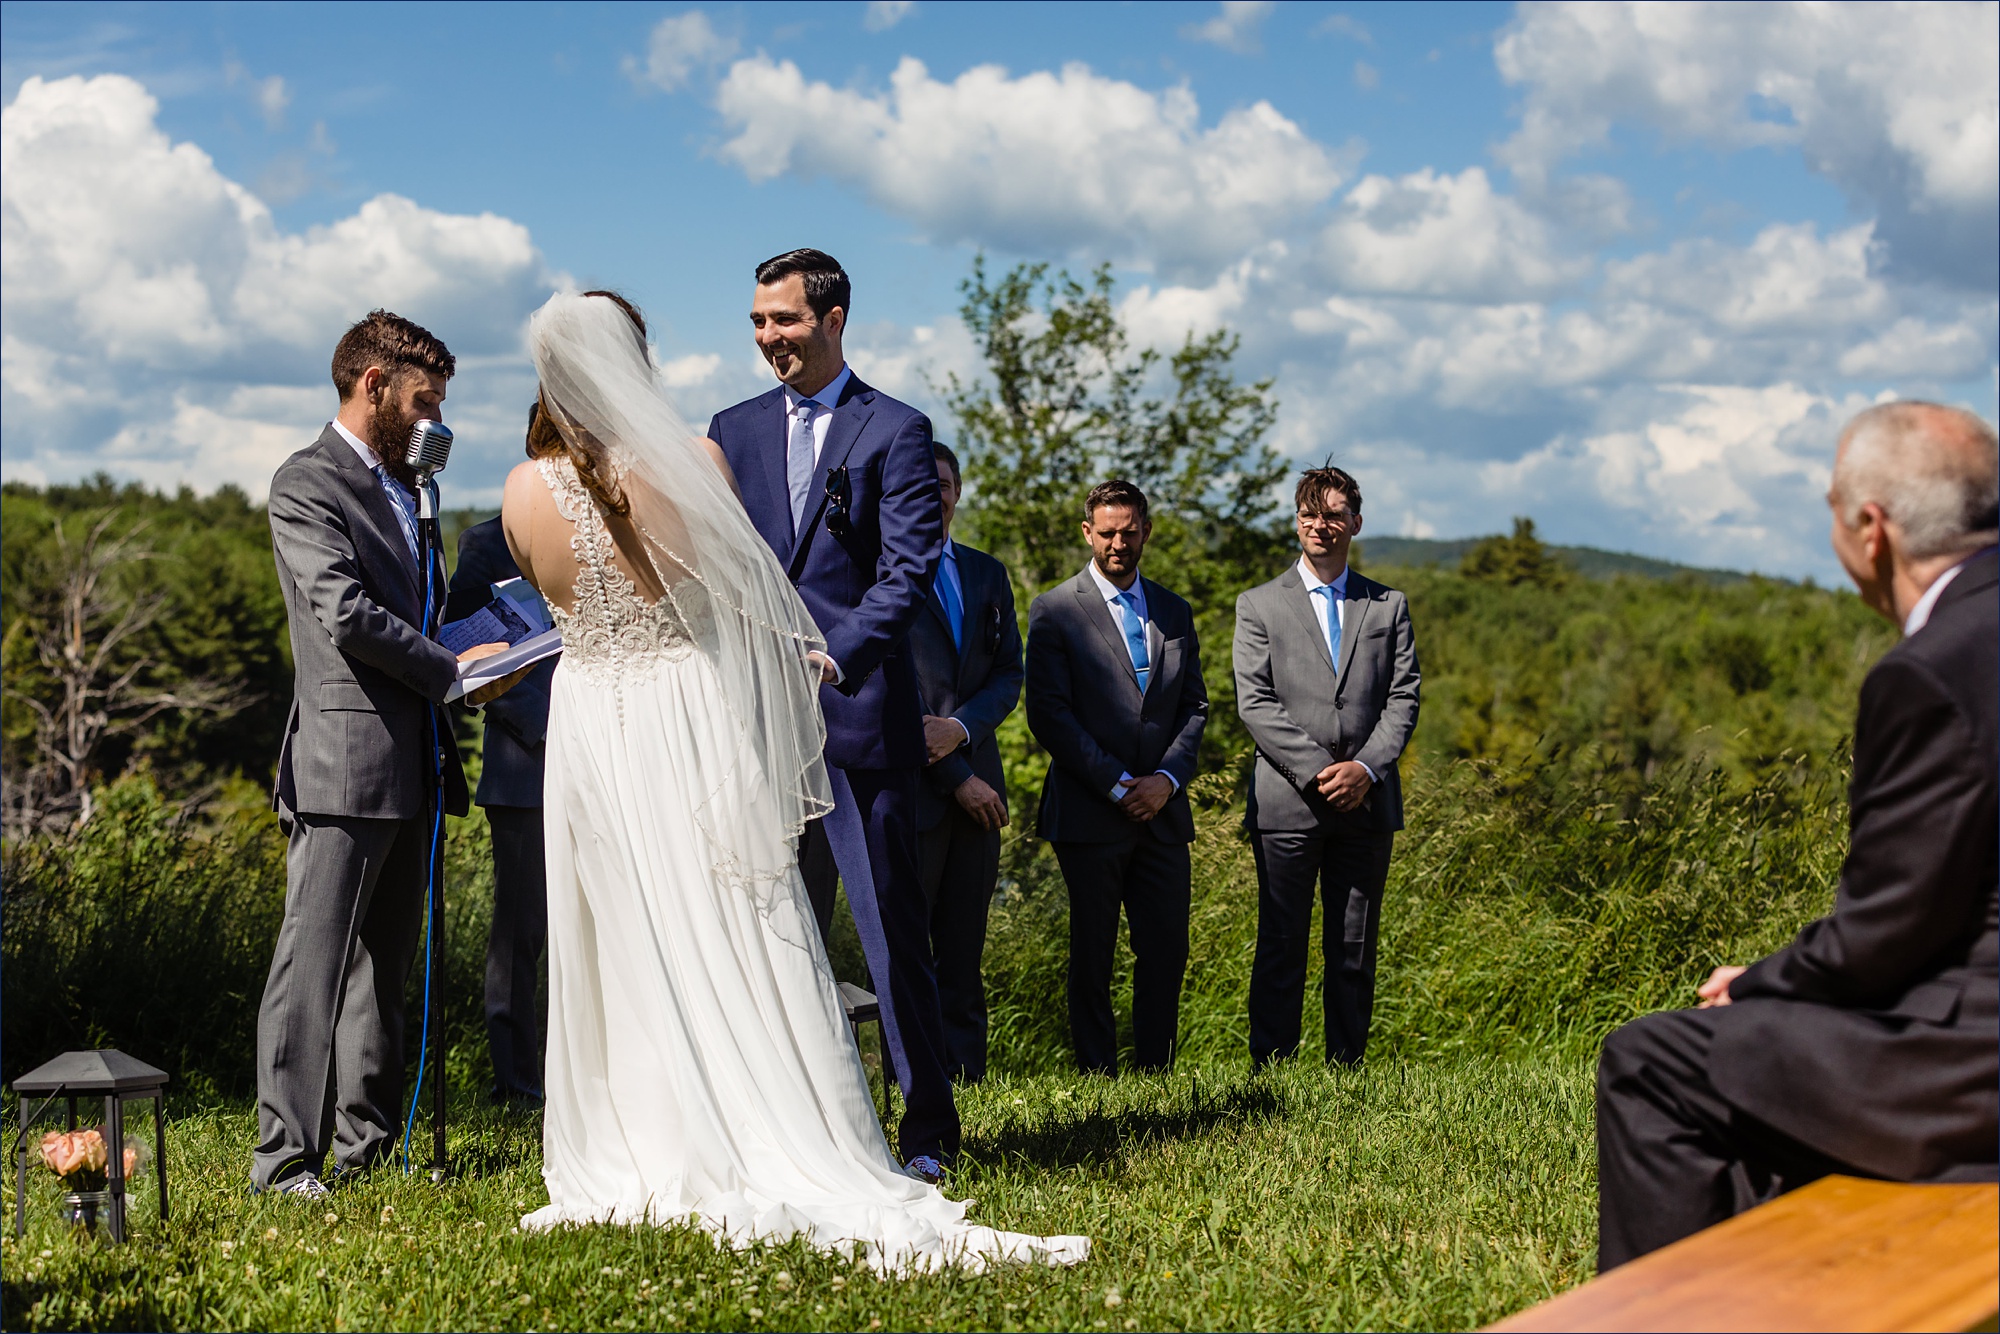 The wedding ceremony at the top of the hill on a sunny summer day with a laughing couple